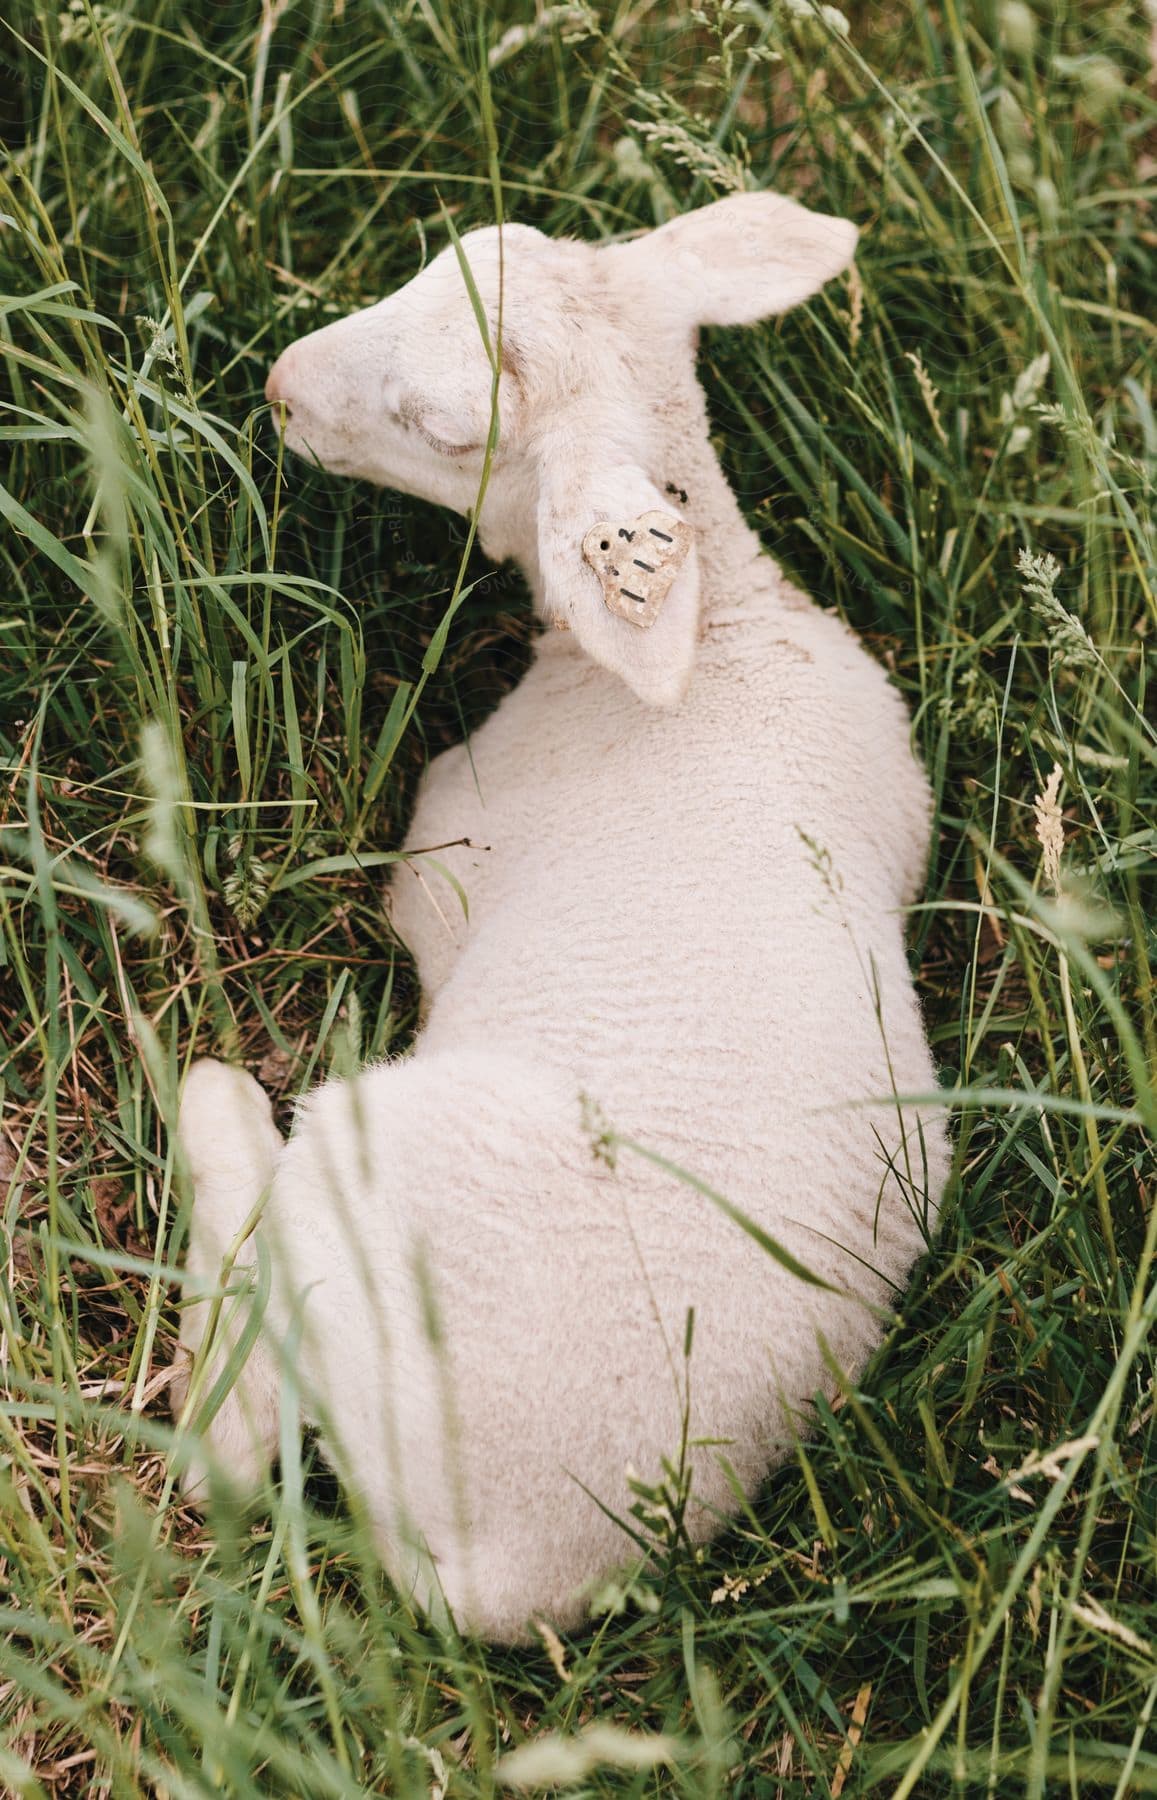 A white sheep resting on green grass